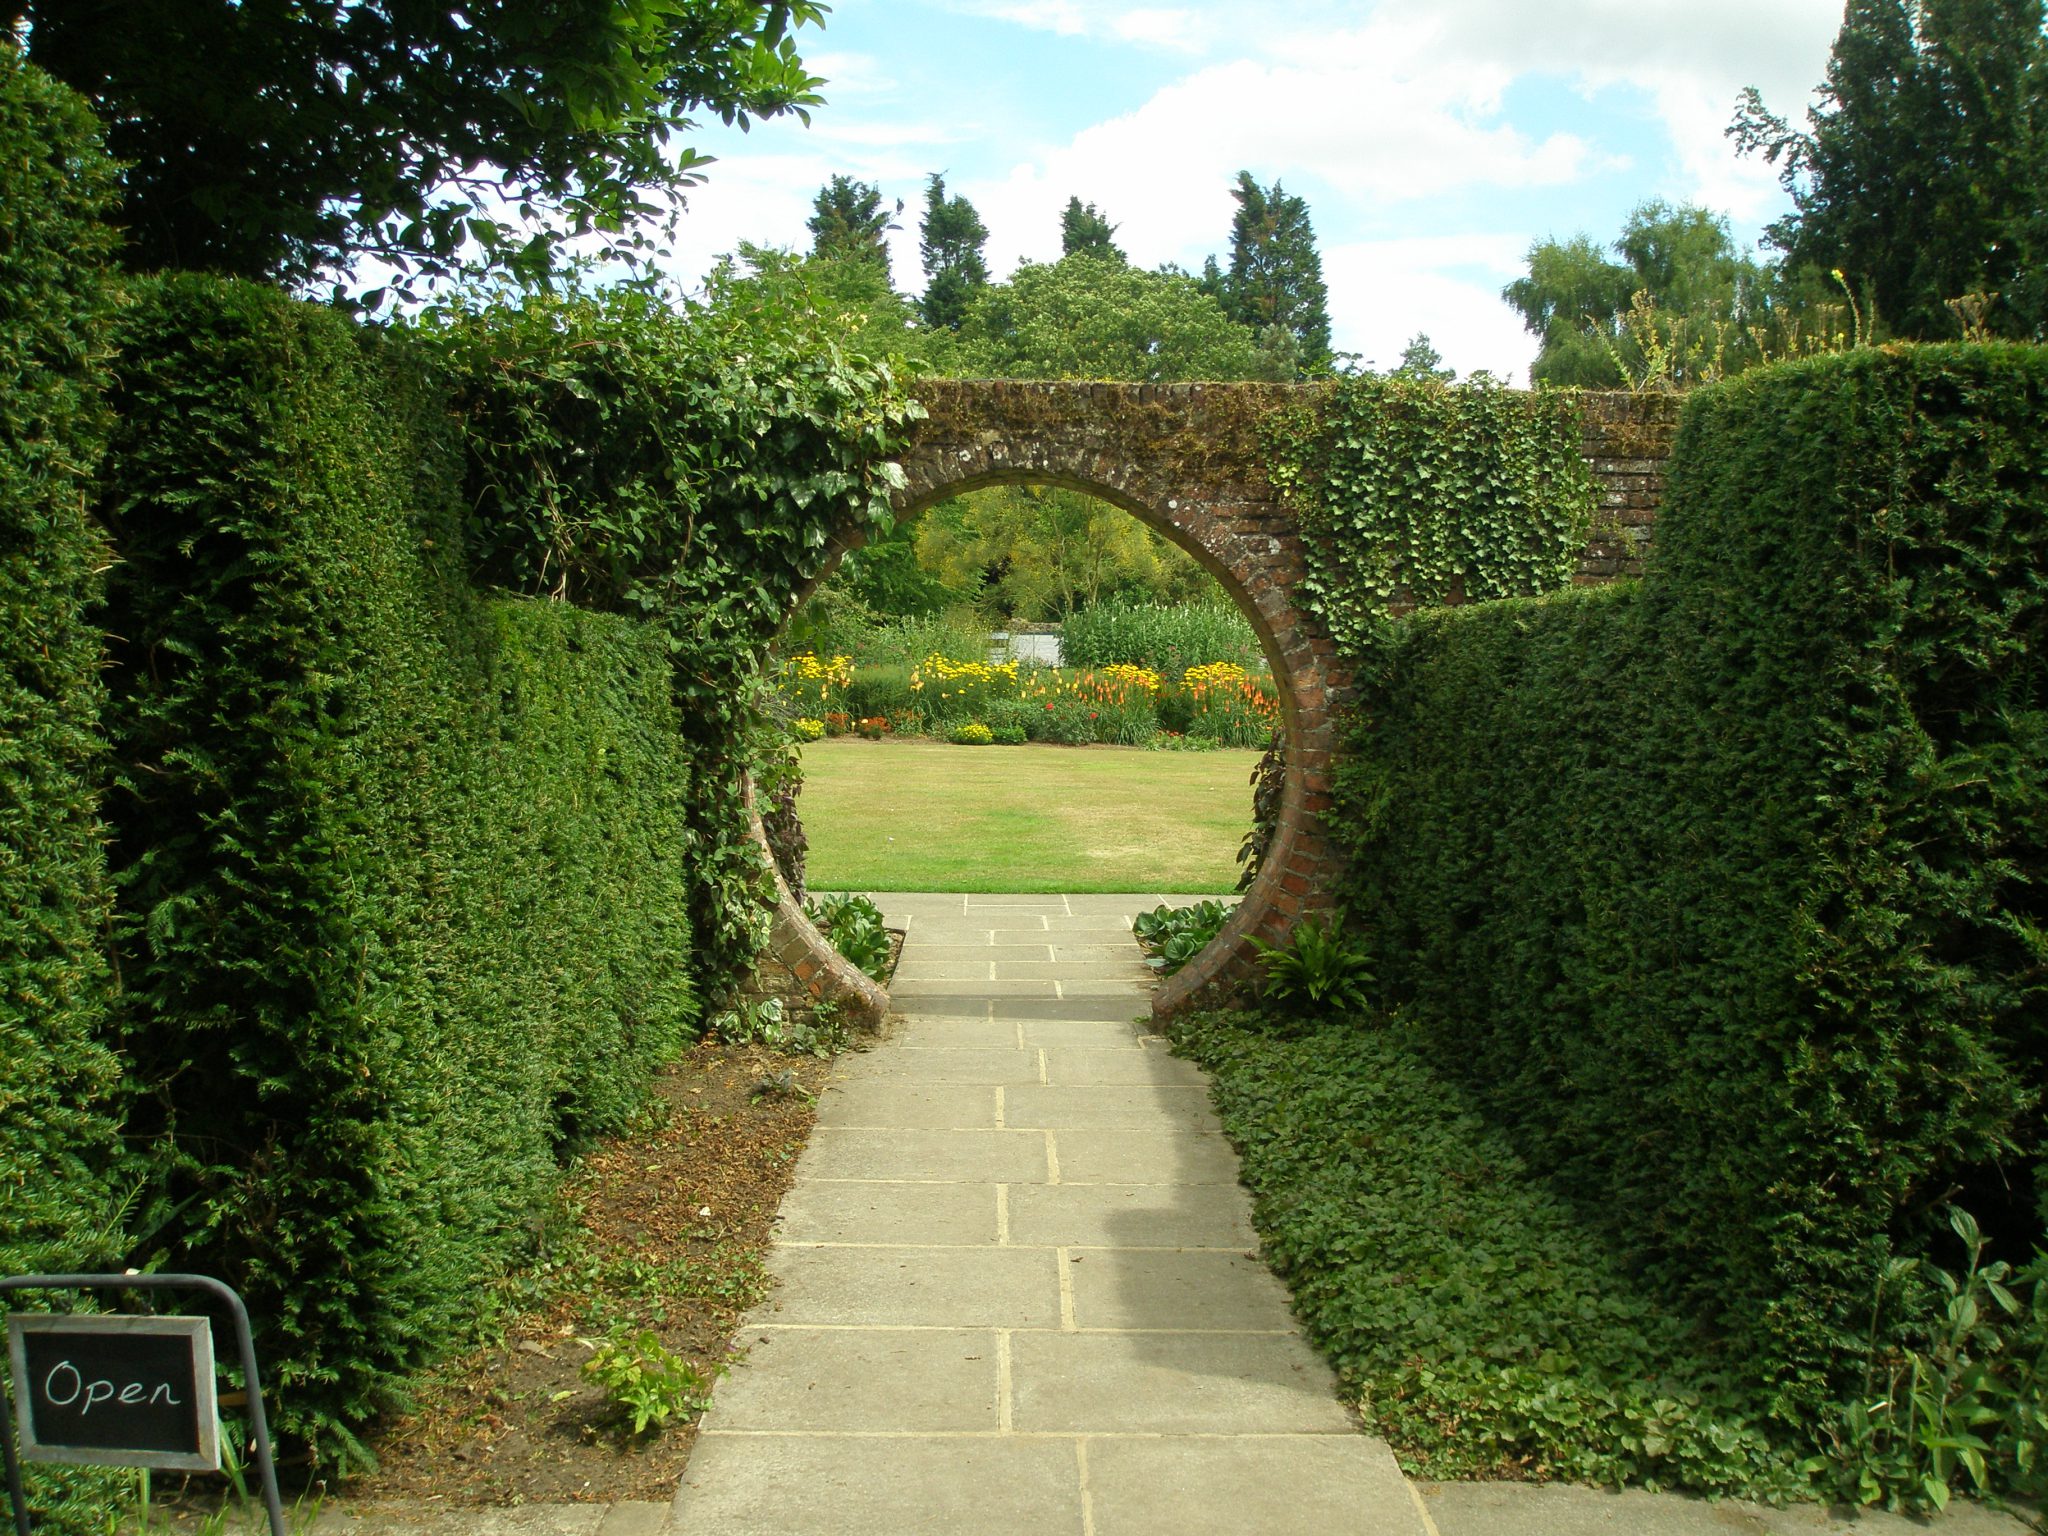 Halfway down the Memorial Garden Walk, this Moon Gate frames a view of the Square Walled Garden, which was built in 1840.